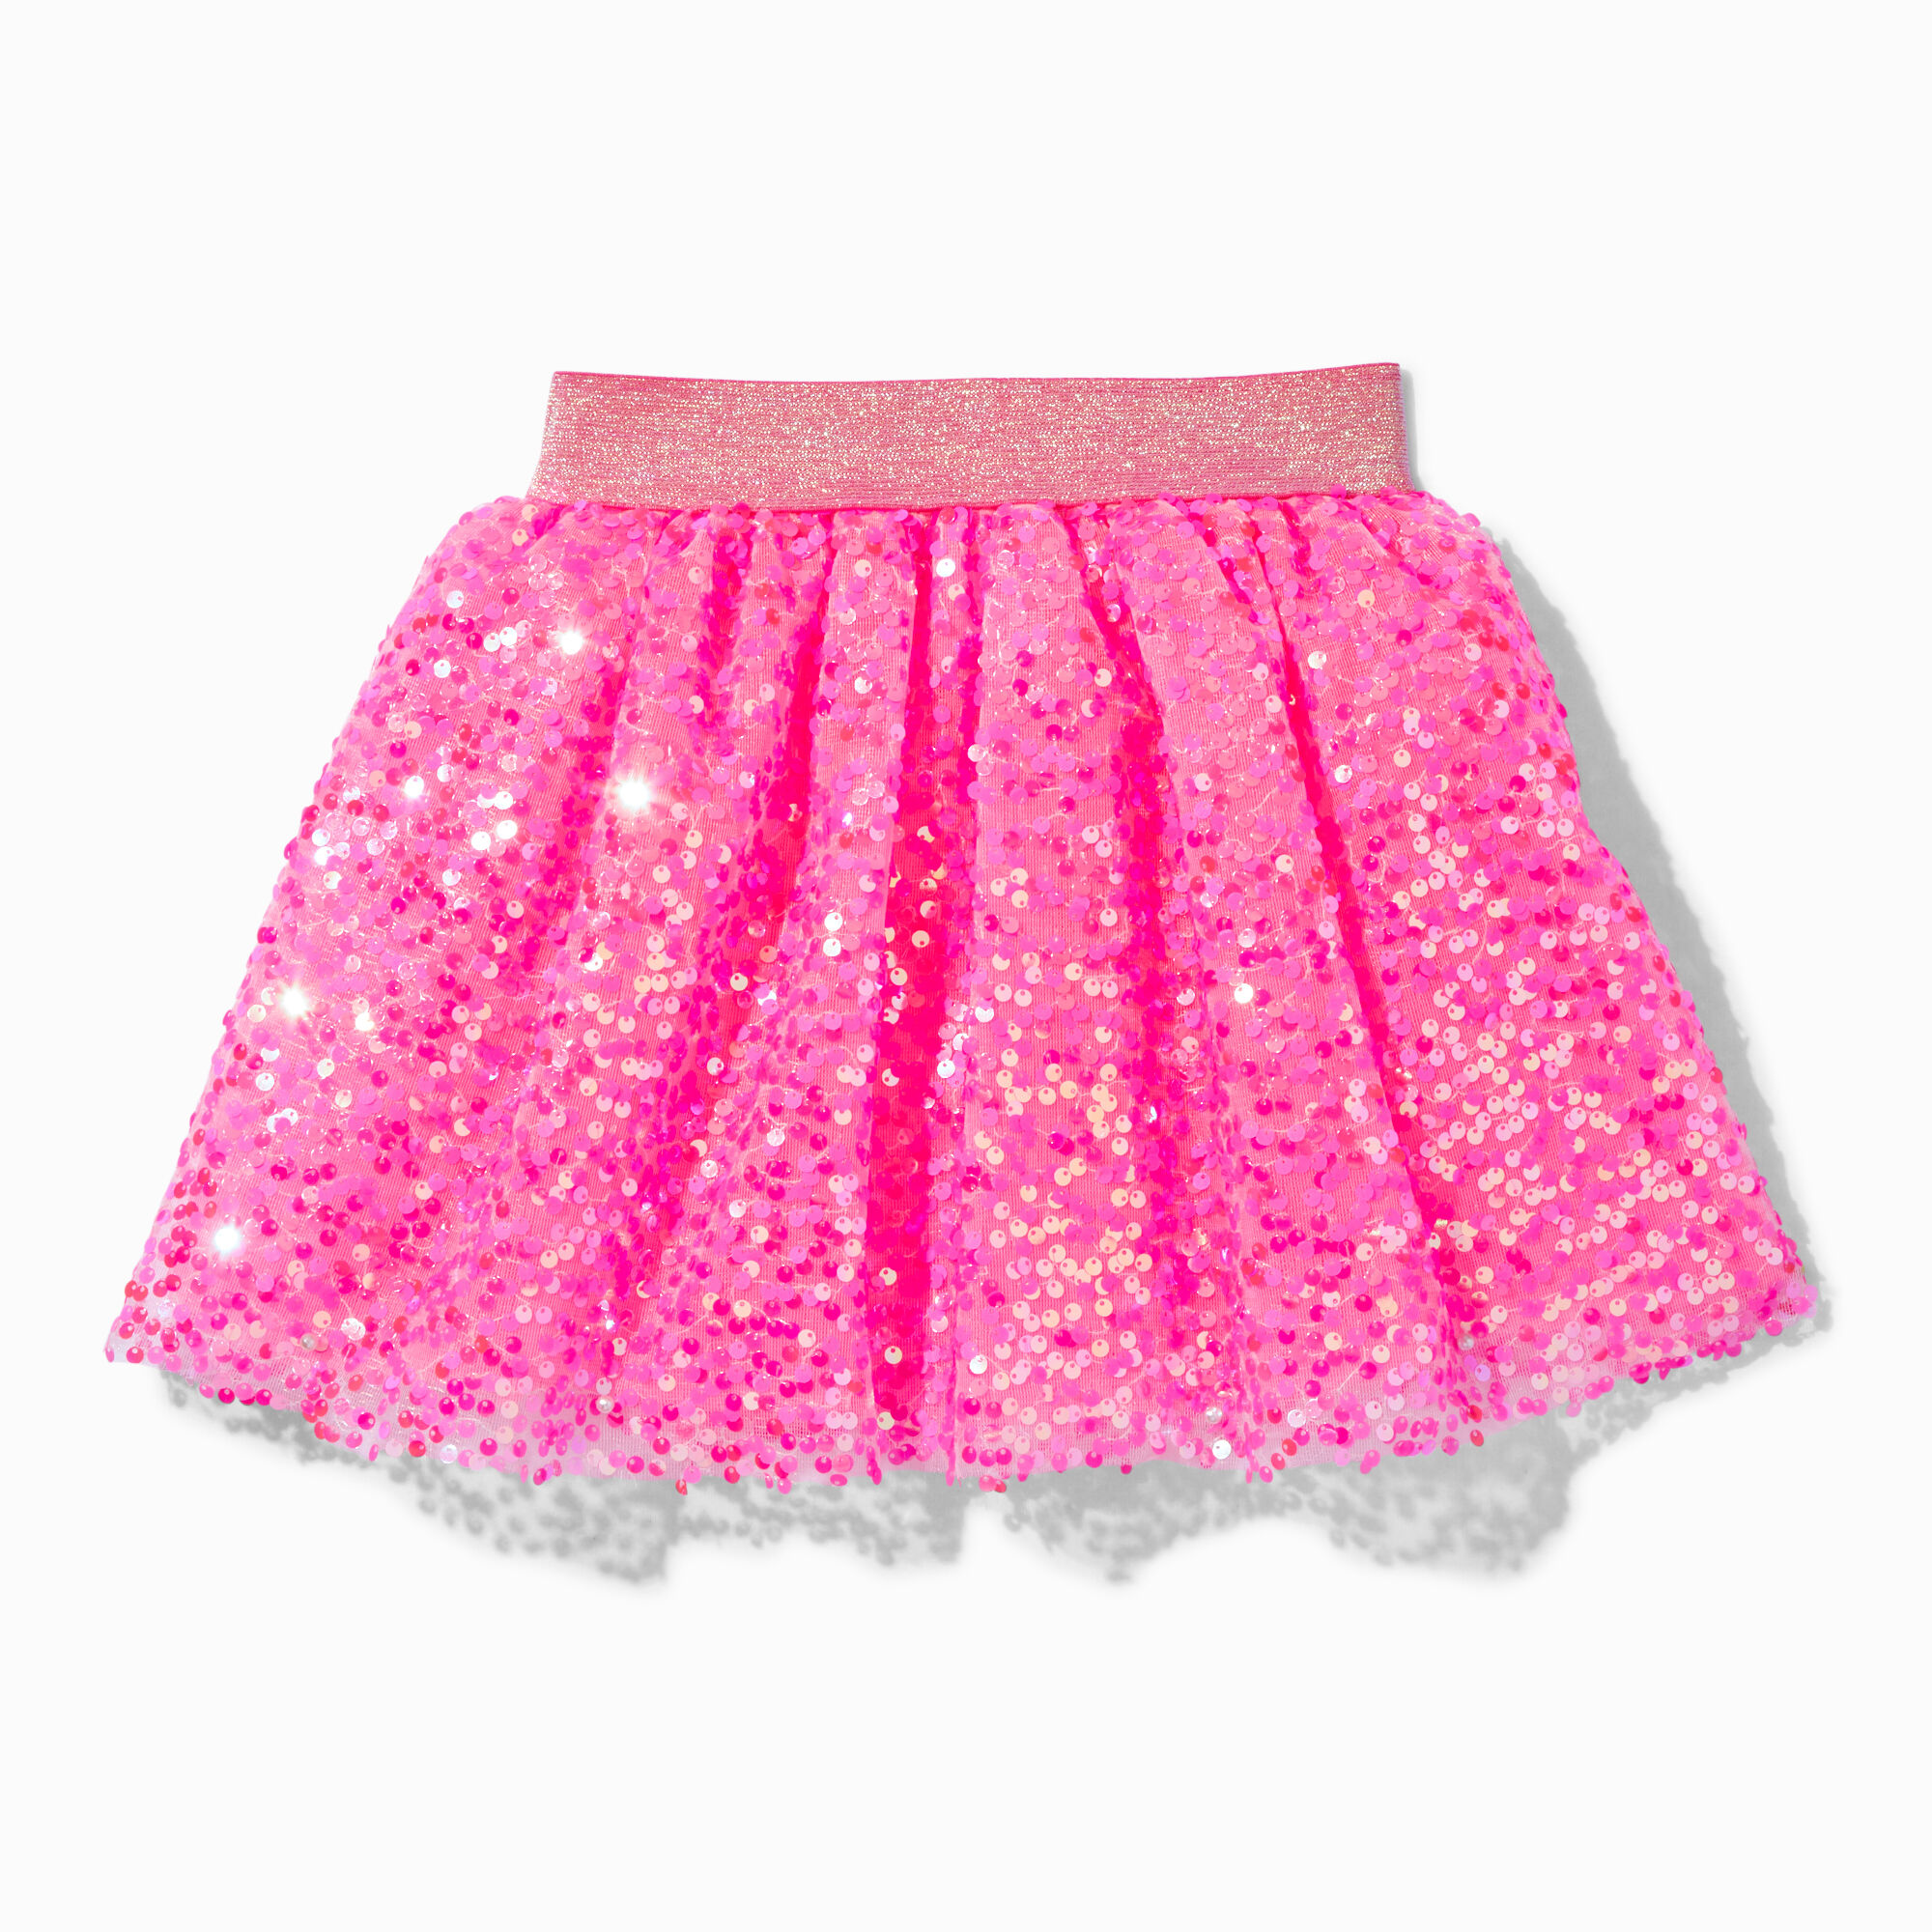 View Claires Club Hot Sequin Tutu Pink information